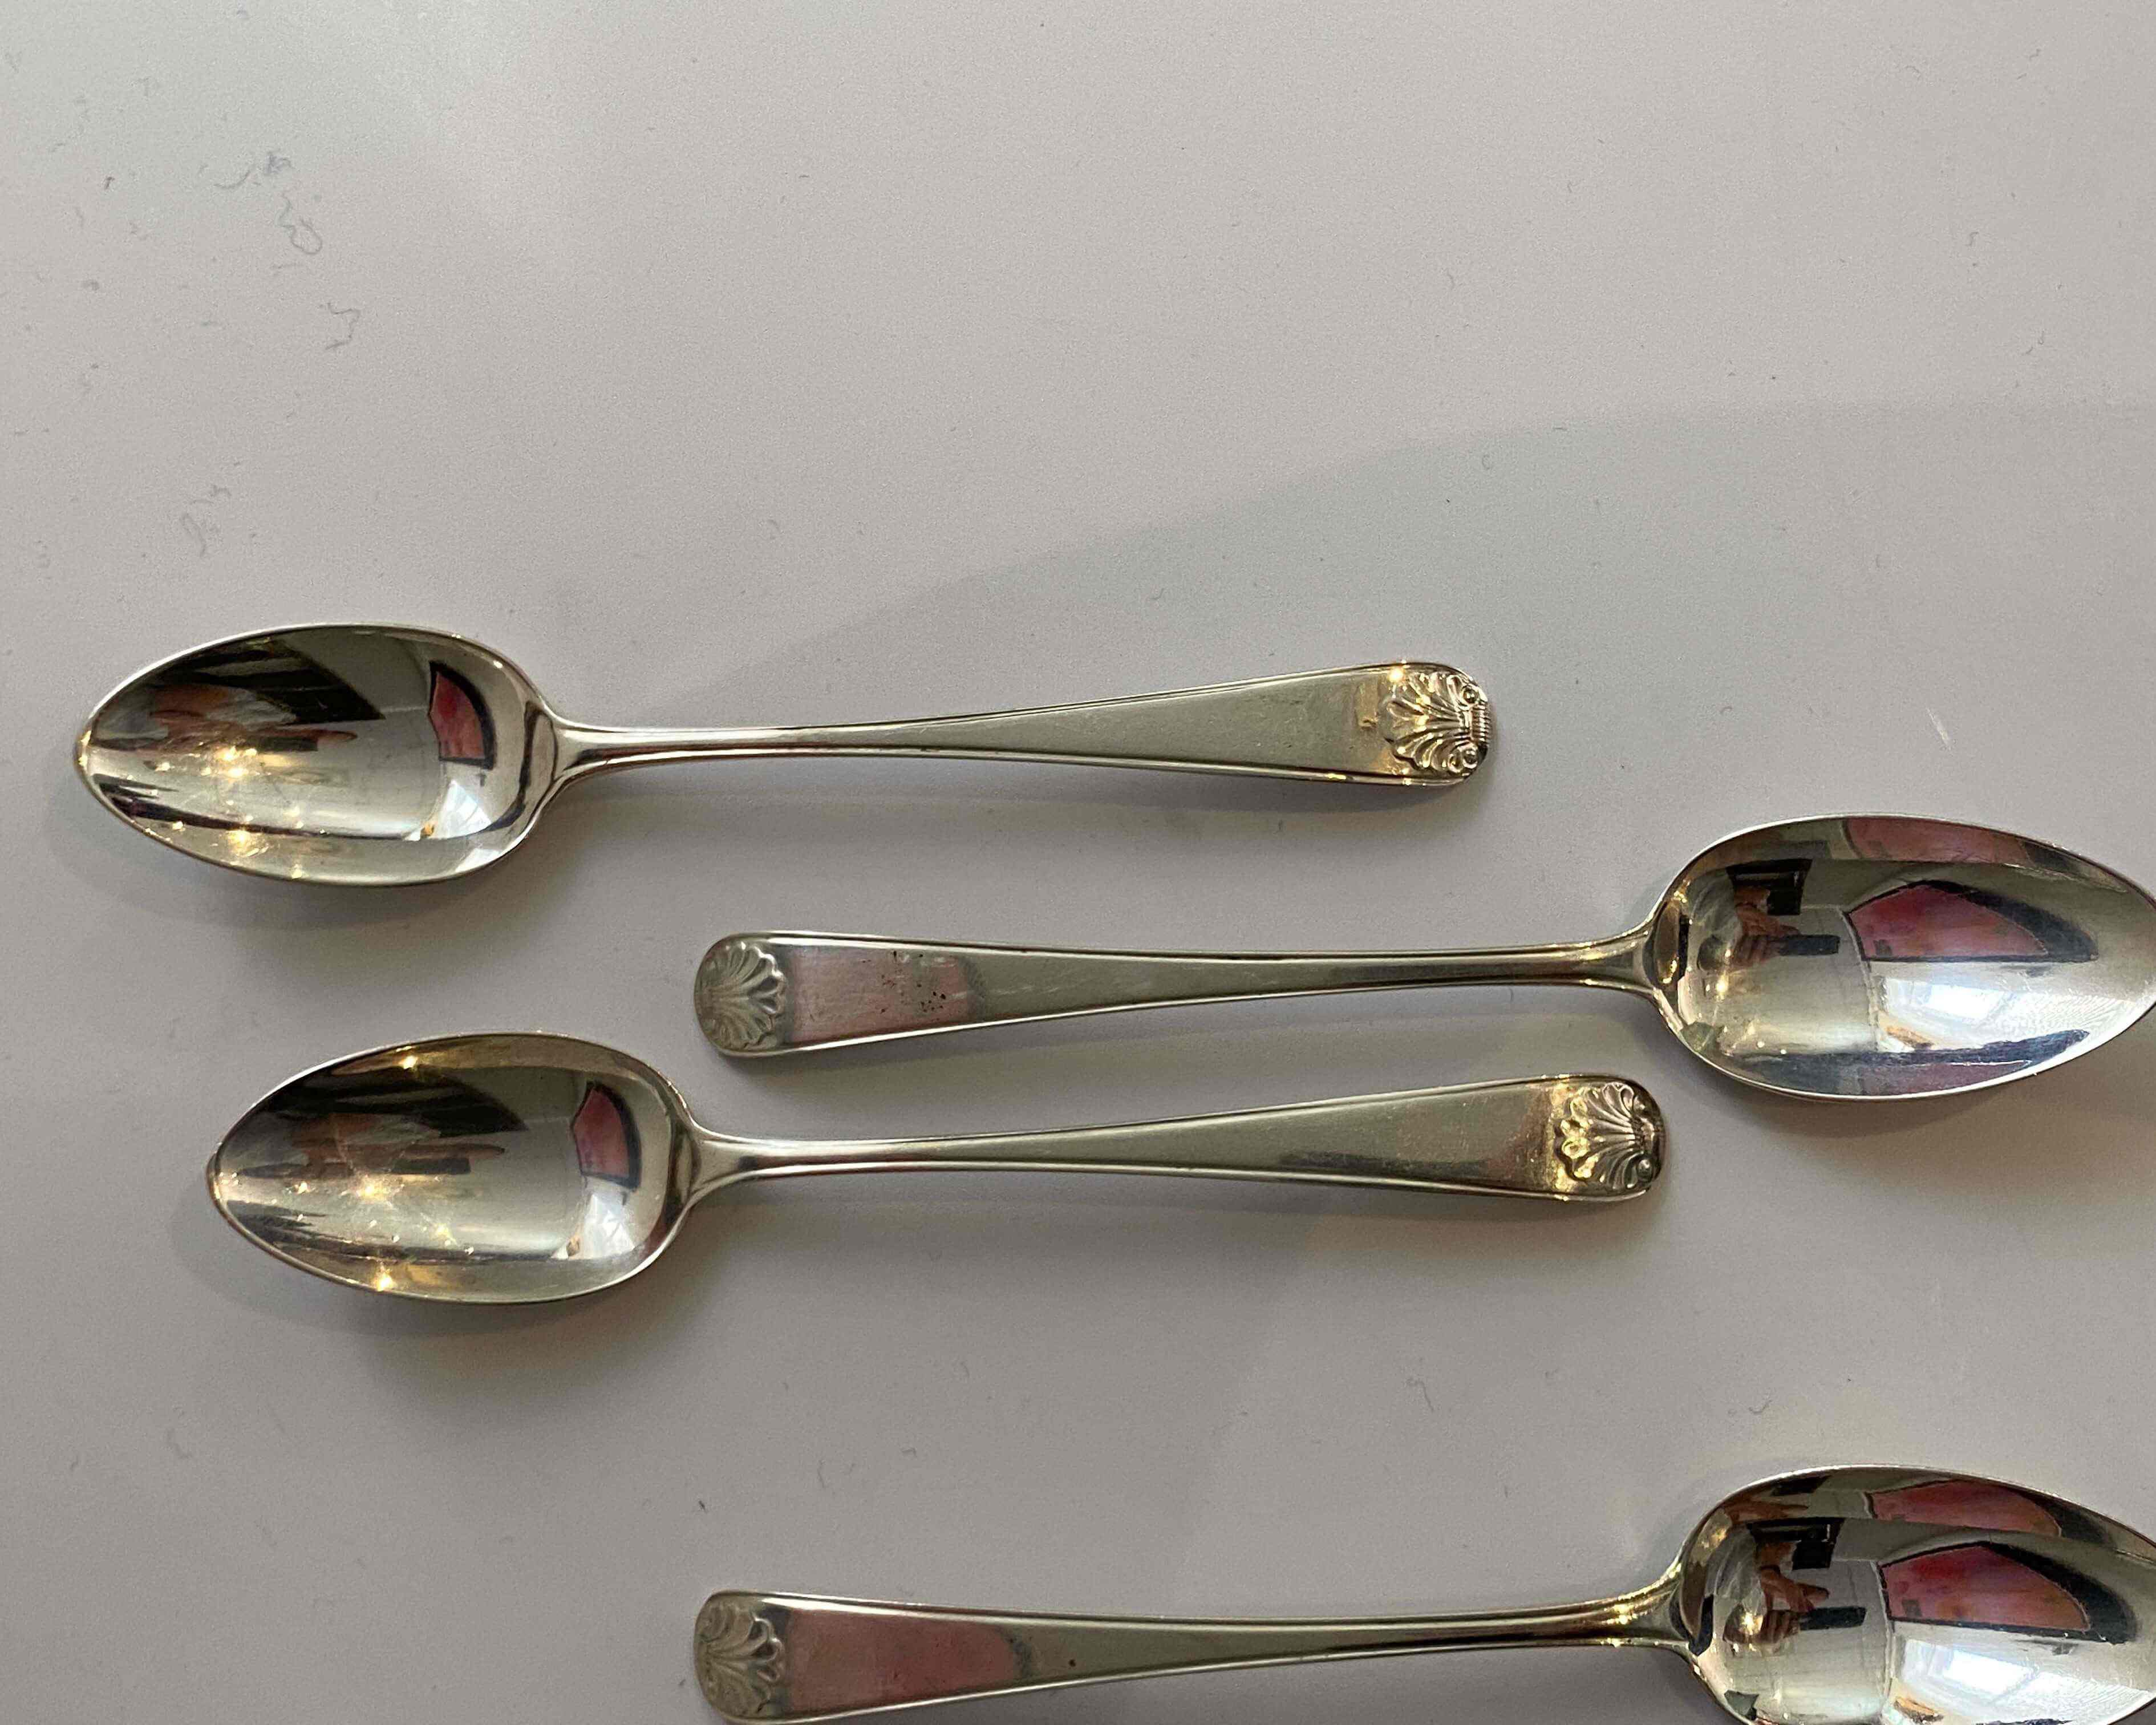 A George IV and William IV silver assembled 'Shell and Thread' pattern flatware service, William Eaton, London, 1825-1837